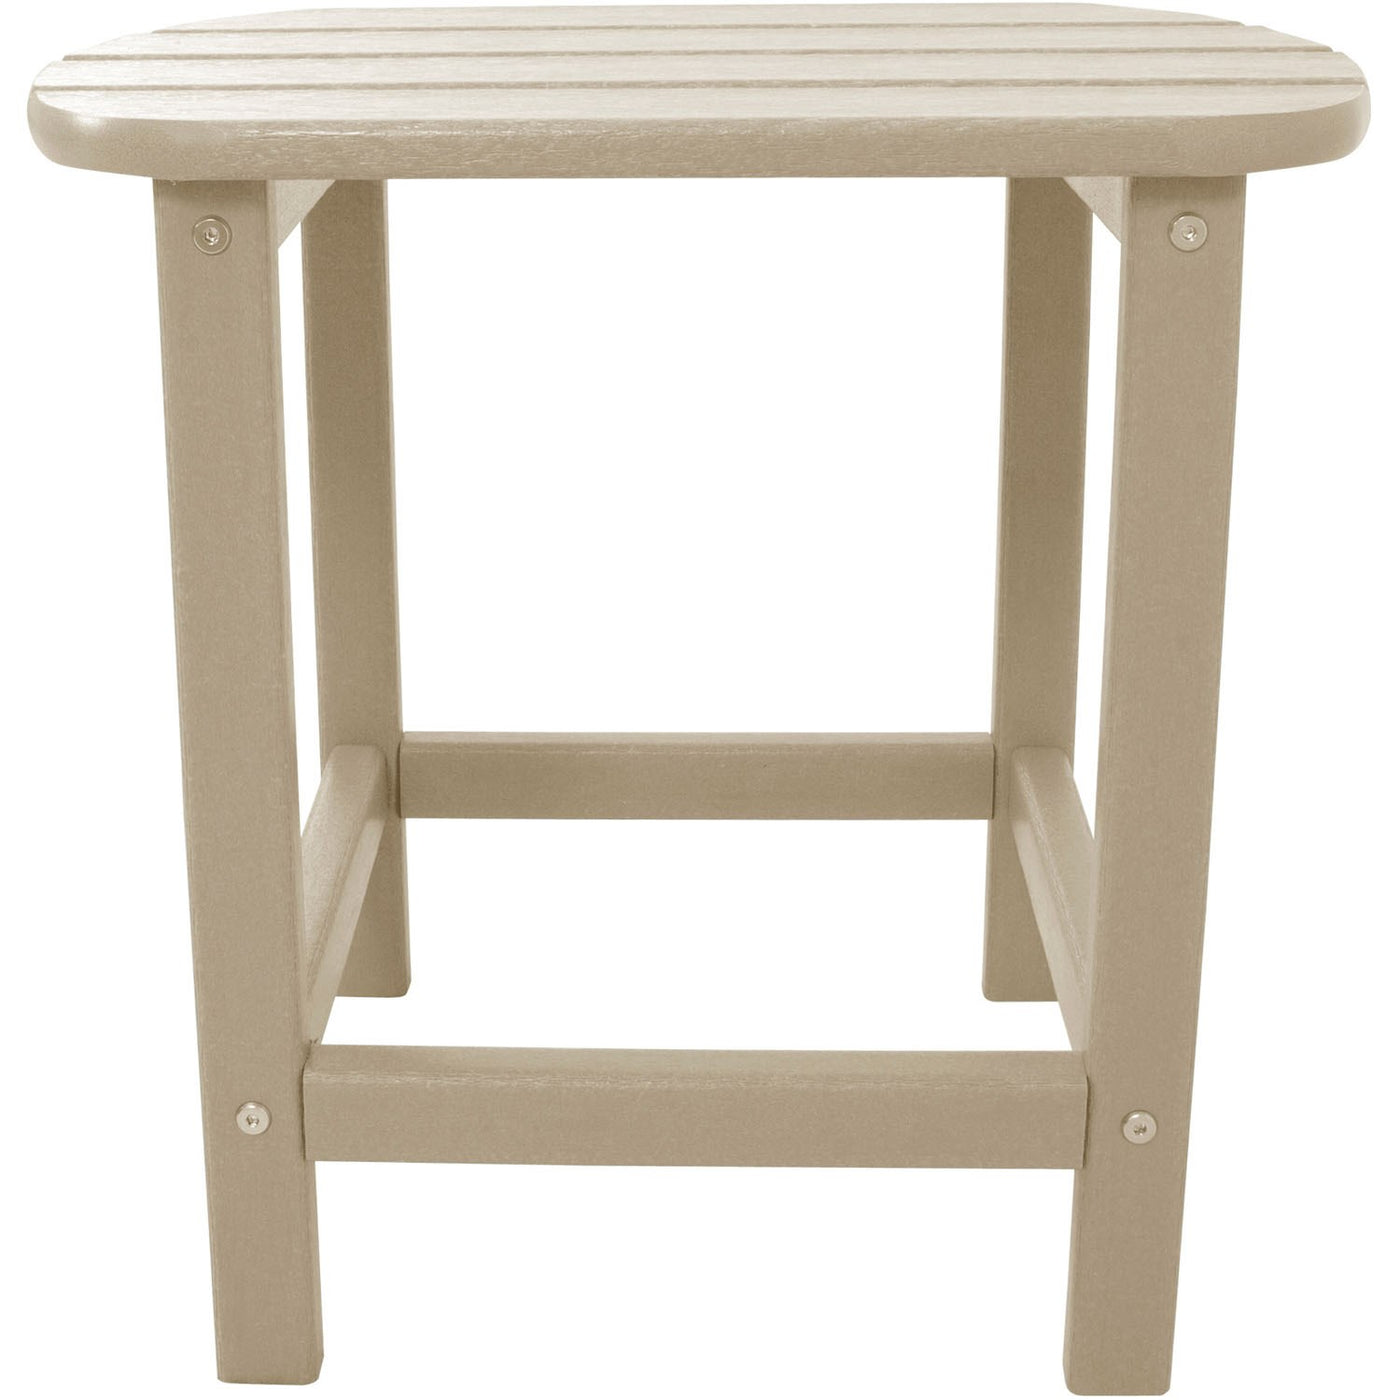 Hanover All-Weather 19"x15" Side Table - Sand - GreenLivingSupply-Store